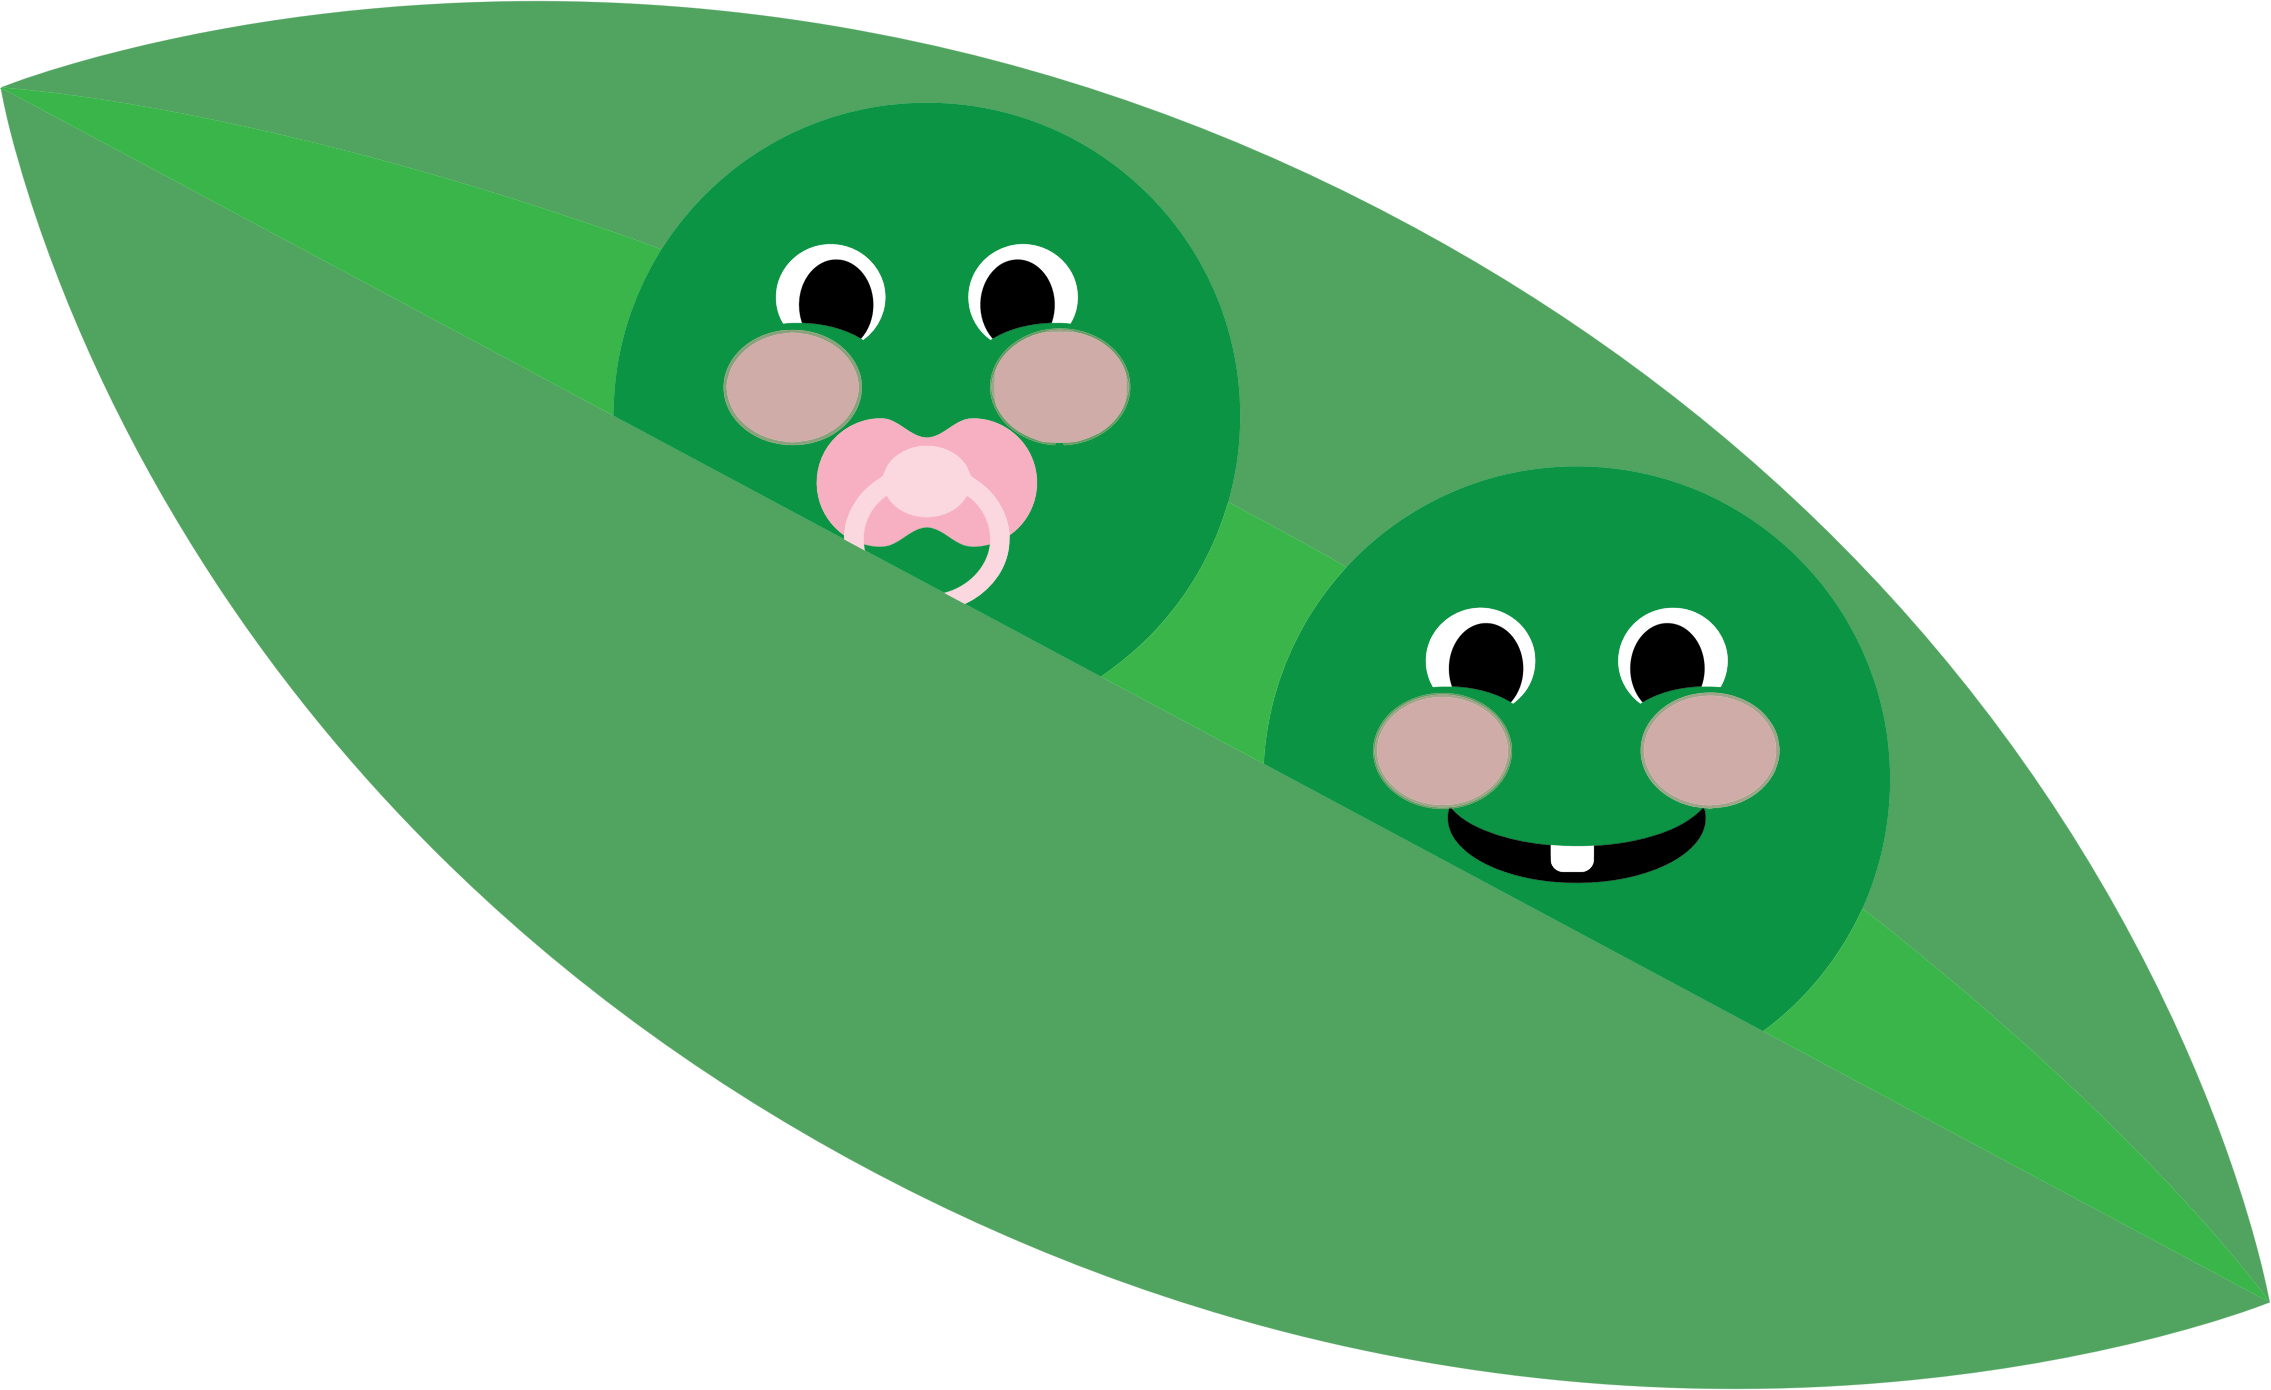 Peas In A Pod 4 - Peas Clipart Png (2271x1390)